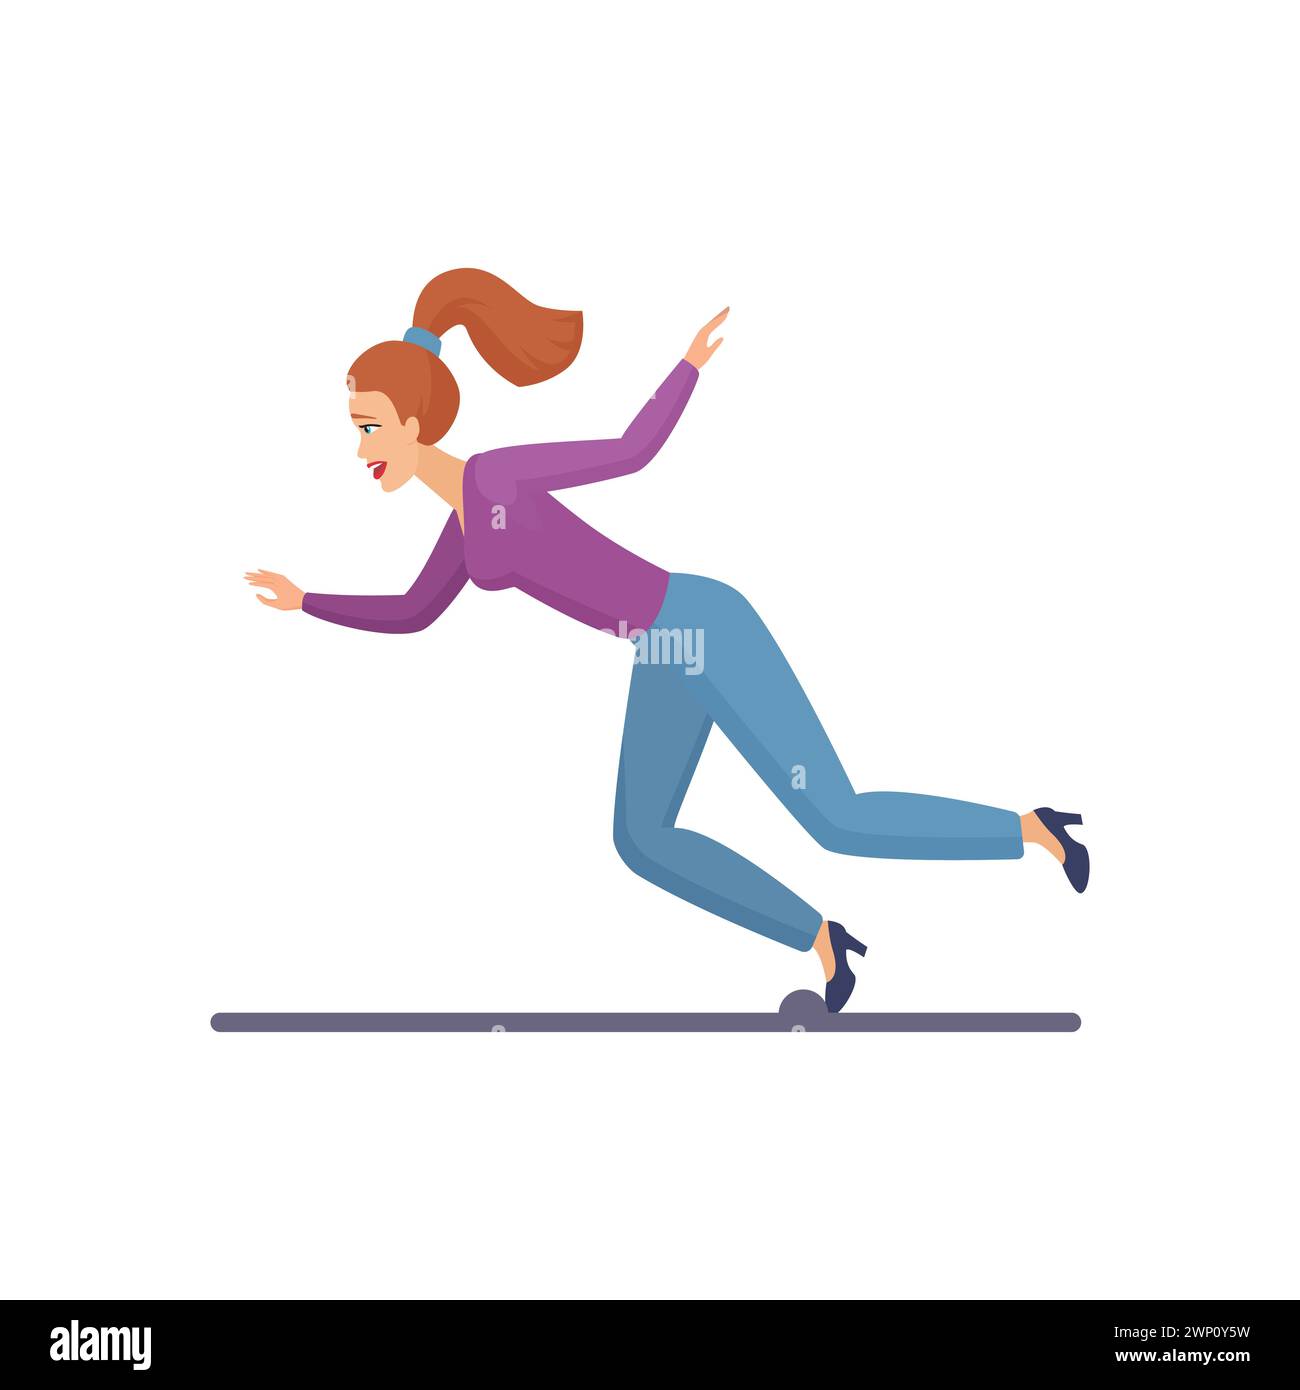 Woman running along road, girl slipping on obstacle and falling vector illustration Stock Vector